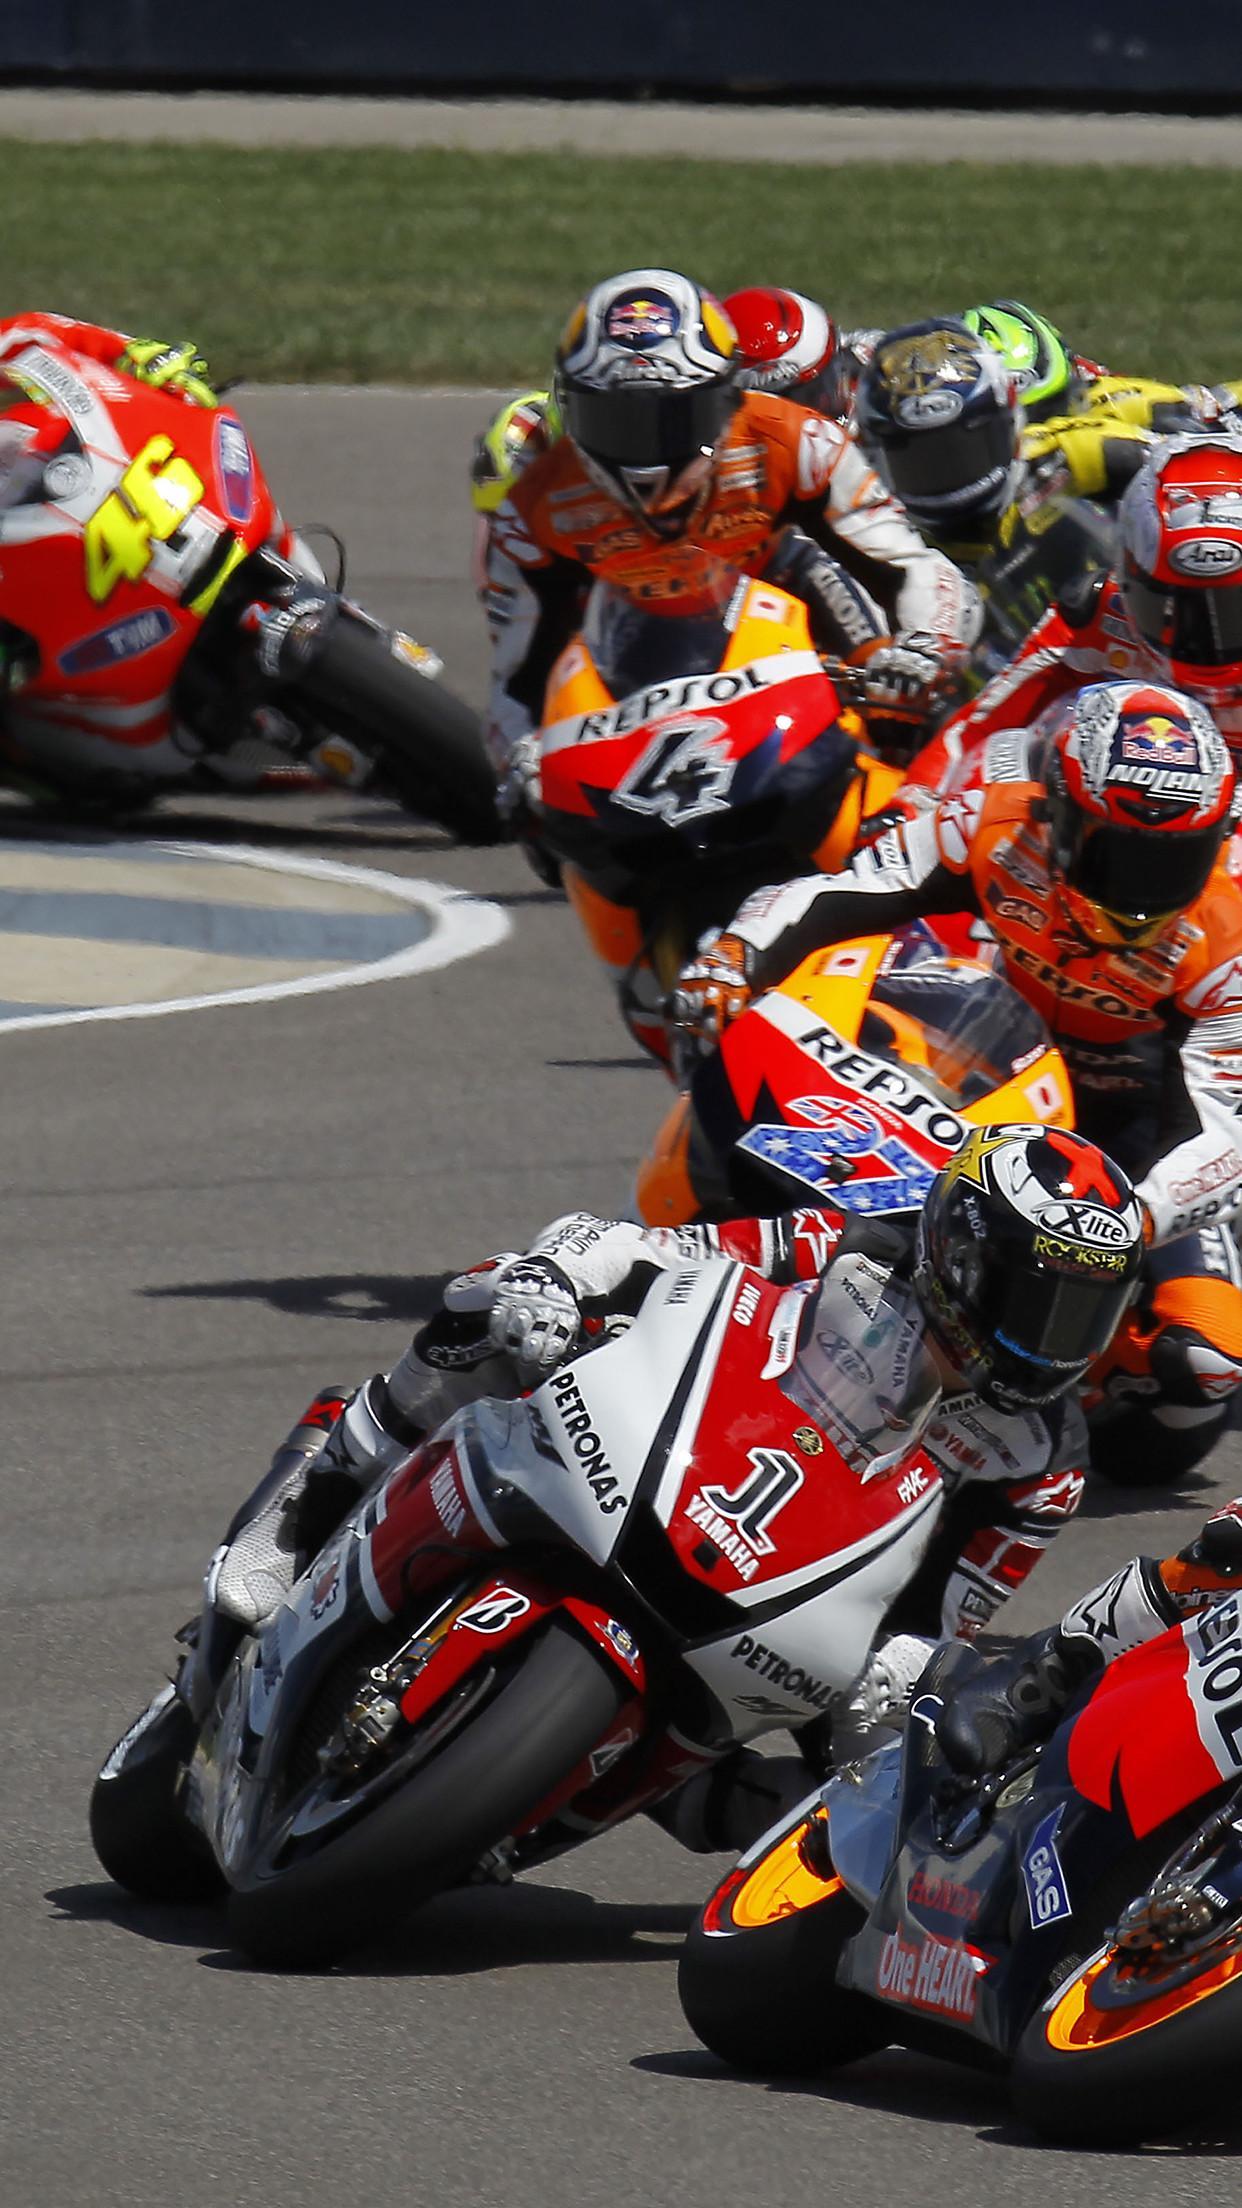 Motogp Wallpapers For Android ,free download,